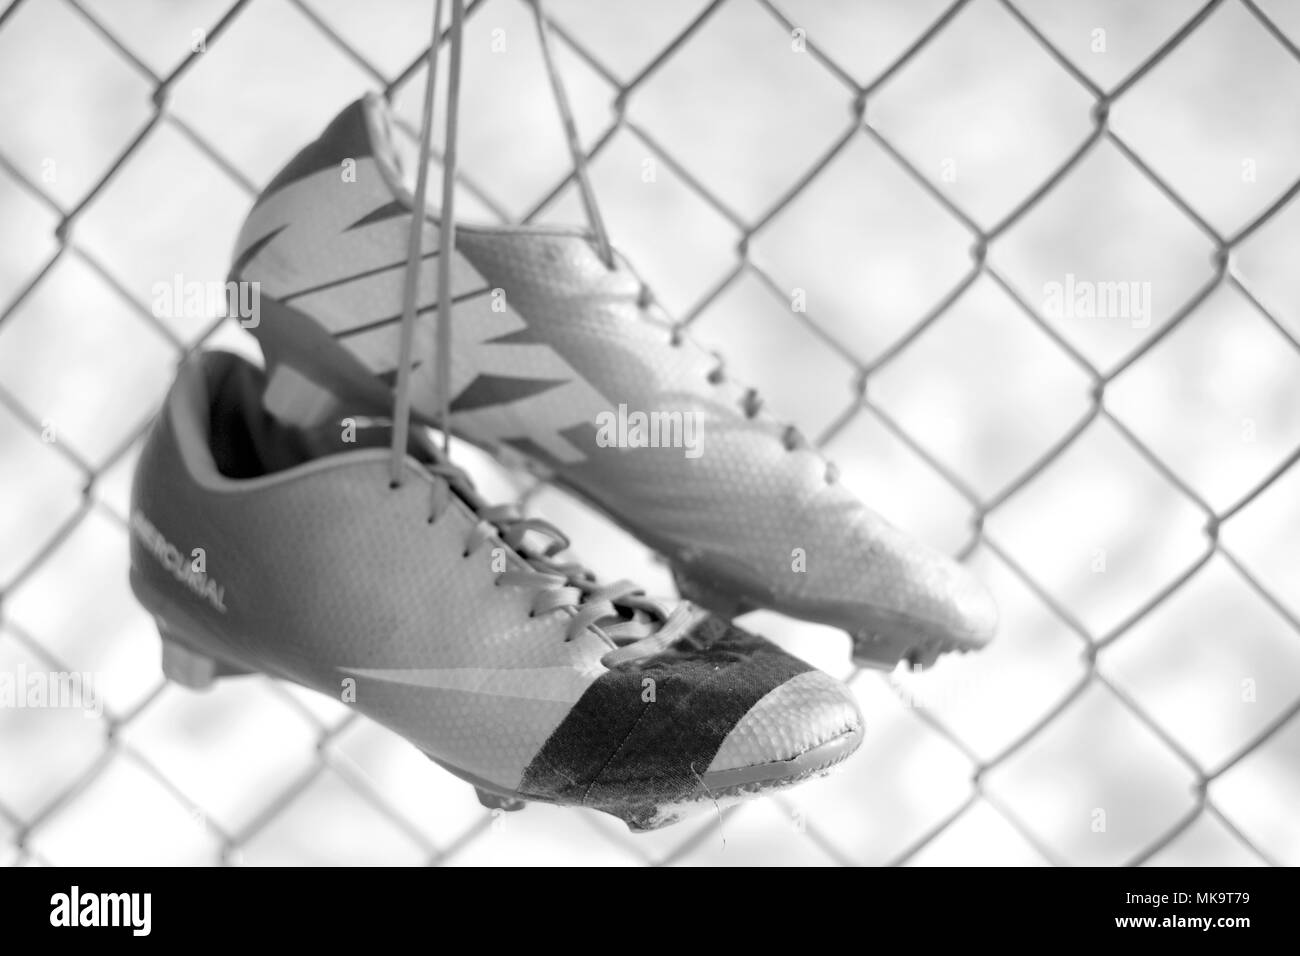 Yakima, Washington / USA - December 17, 2016:  Worn out and well loved soccer cleats displayed in an artistic photograph. Stock Photo